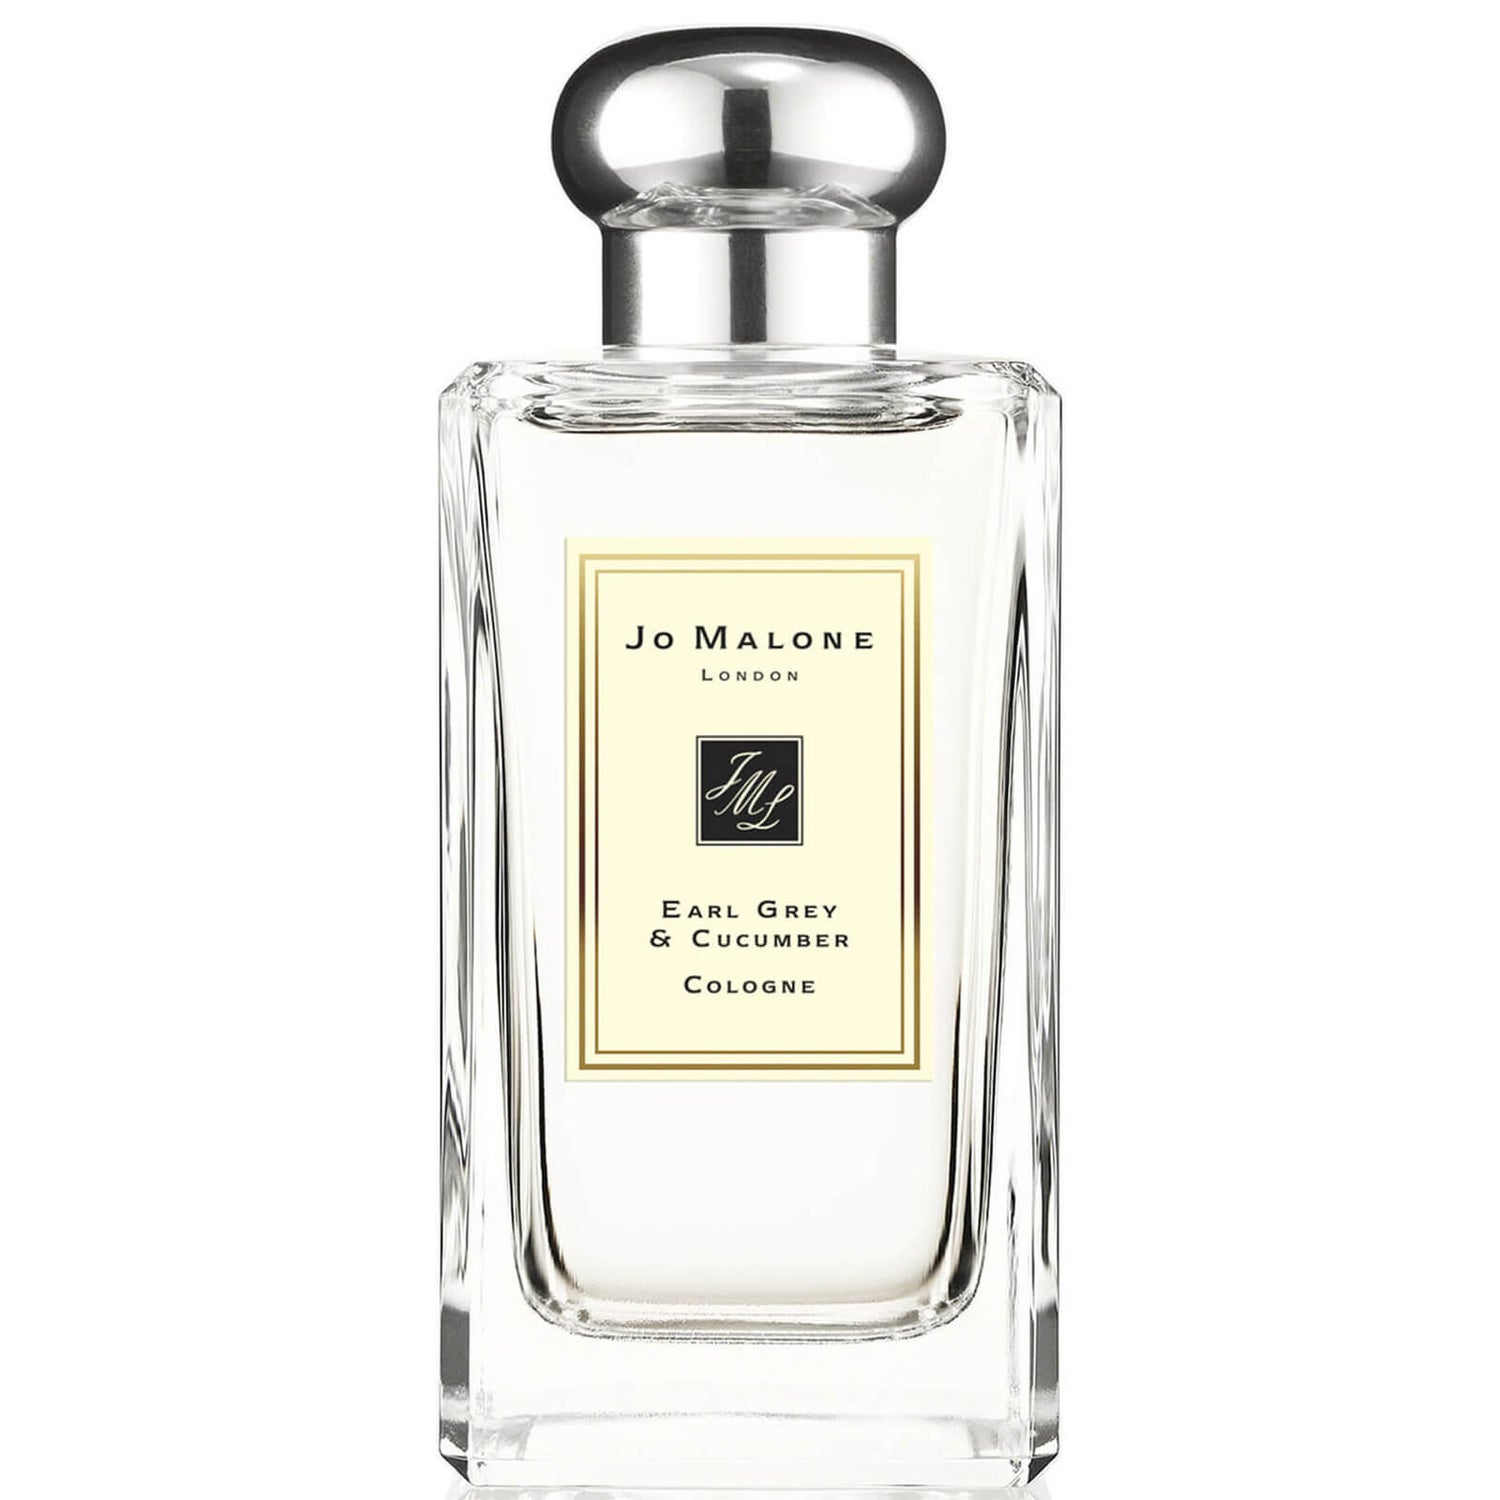 Jo Malone London Earl Grey and Cucumber Cologne - 100ml